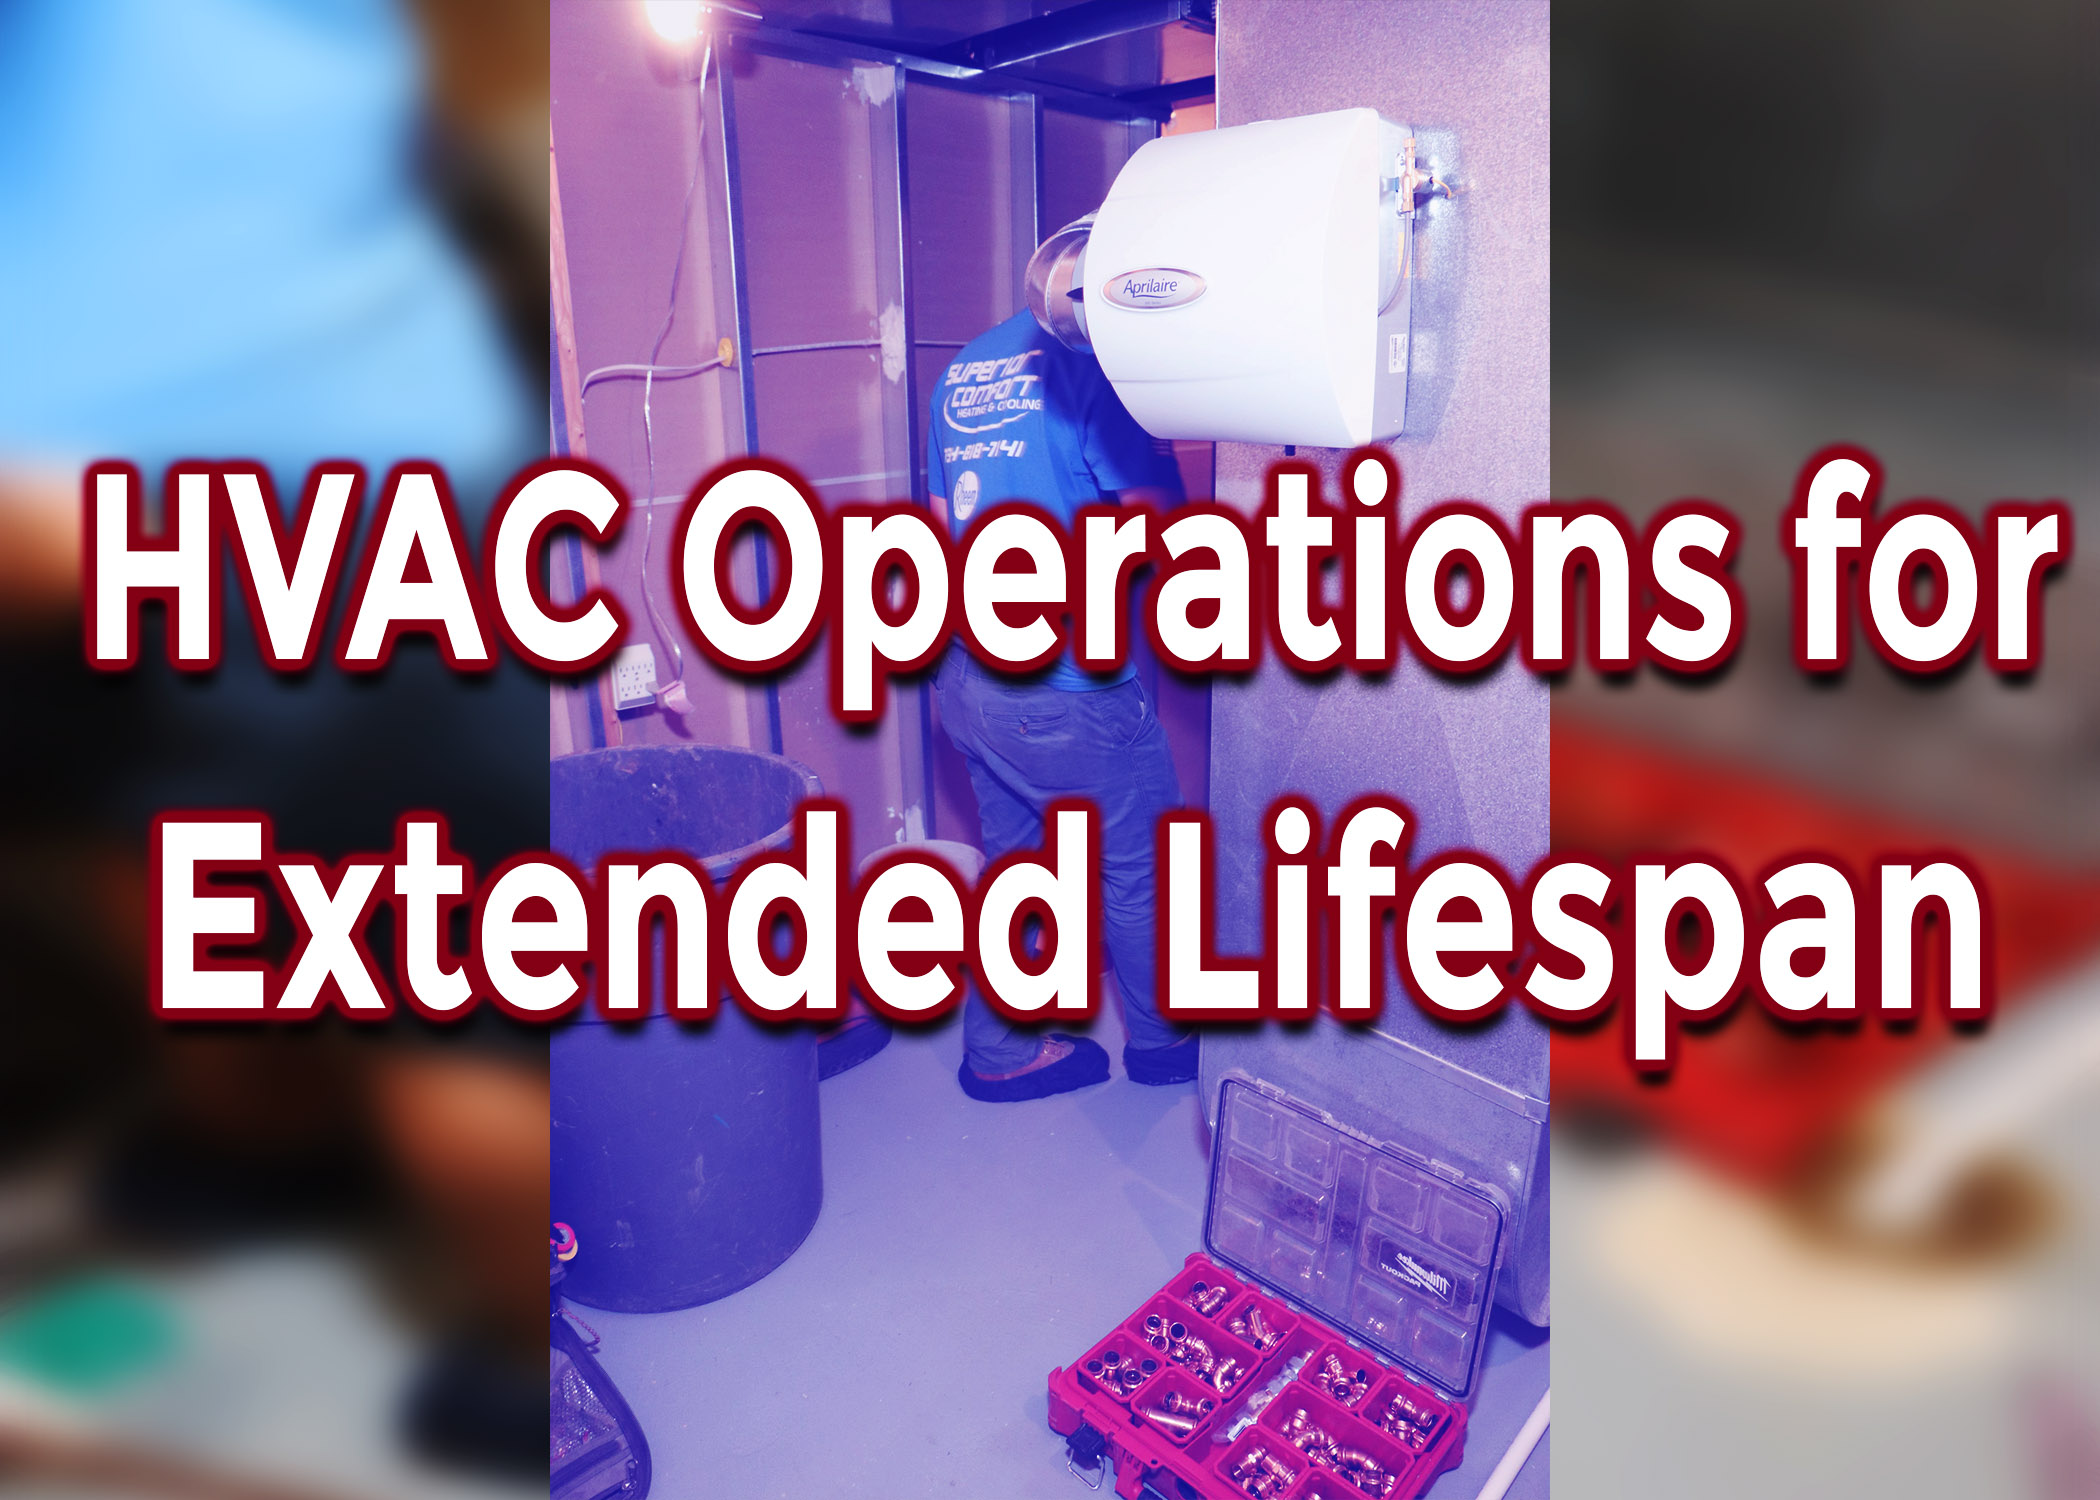 HVAC Service Trenton Michigan- The Basis of HVAC Operations for Extended Lifespan